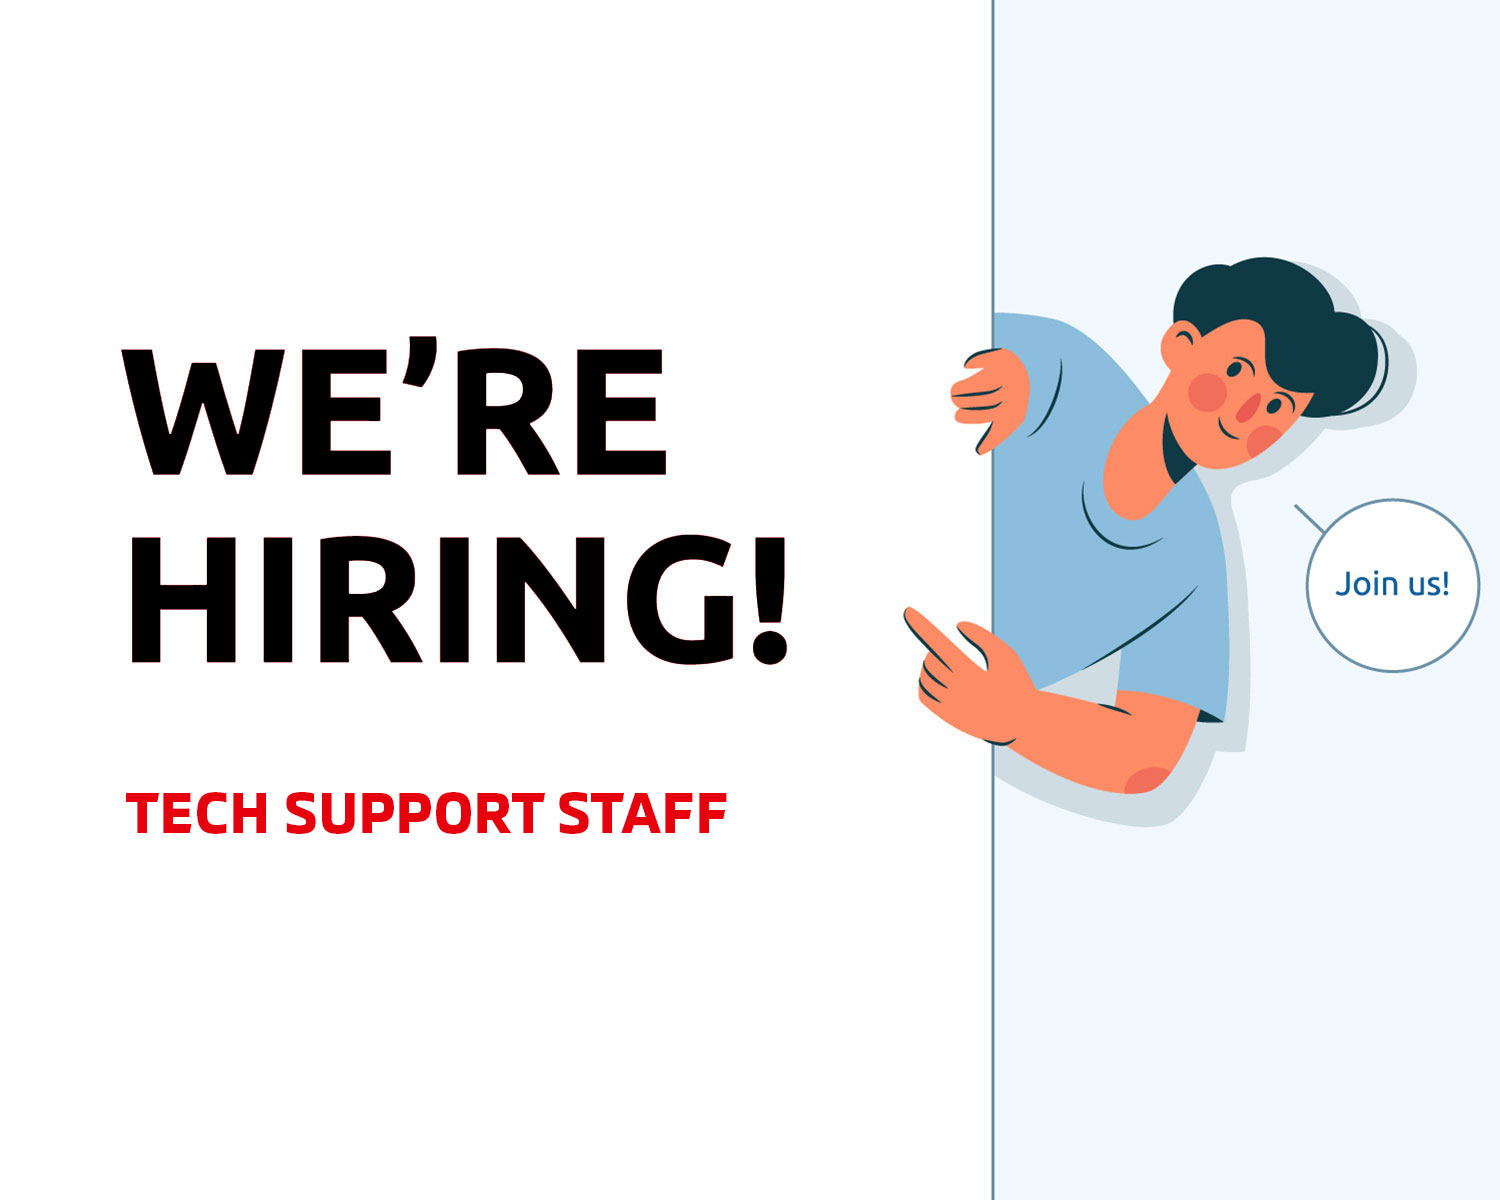 TUYỂN DỤNG: TECH SUPPORT STAFF